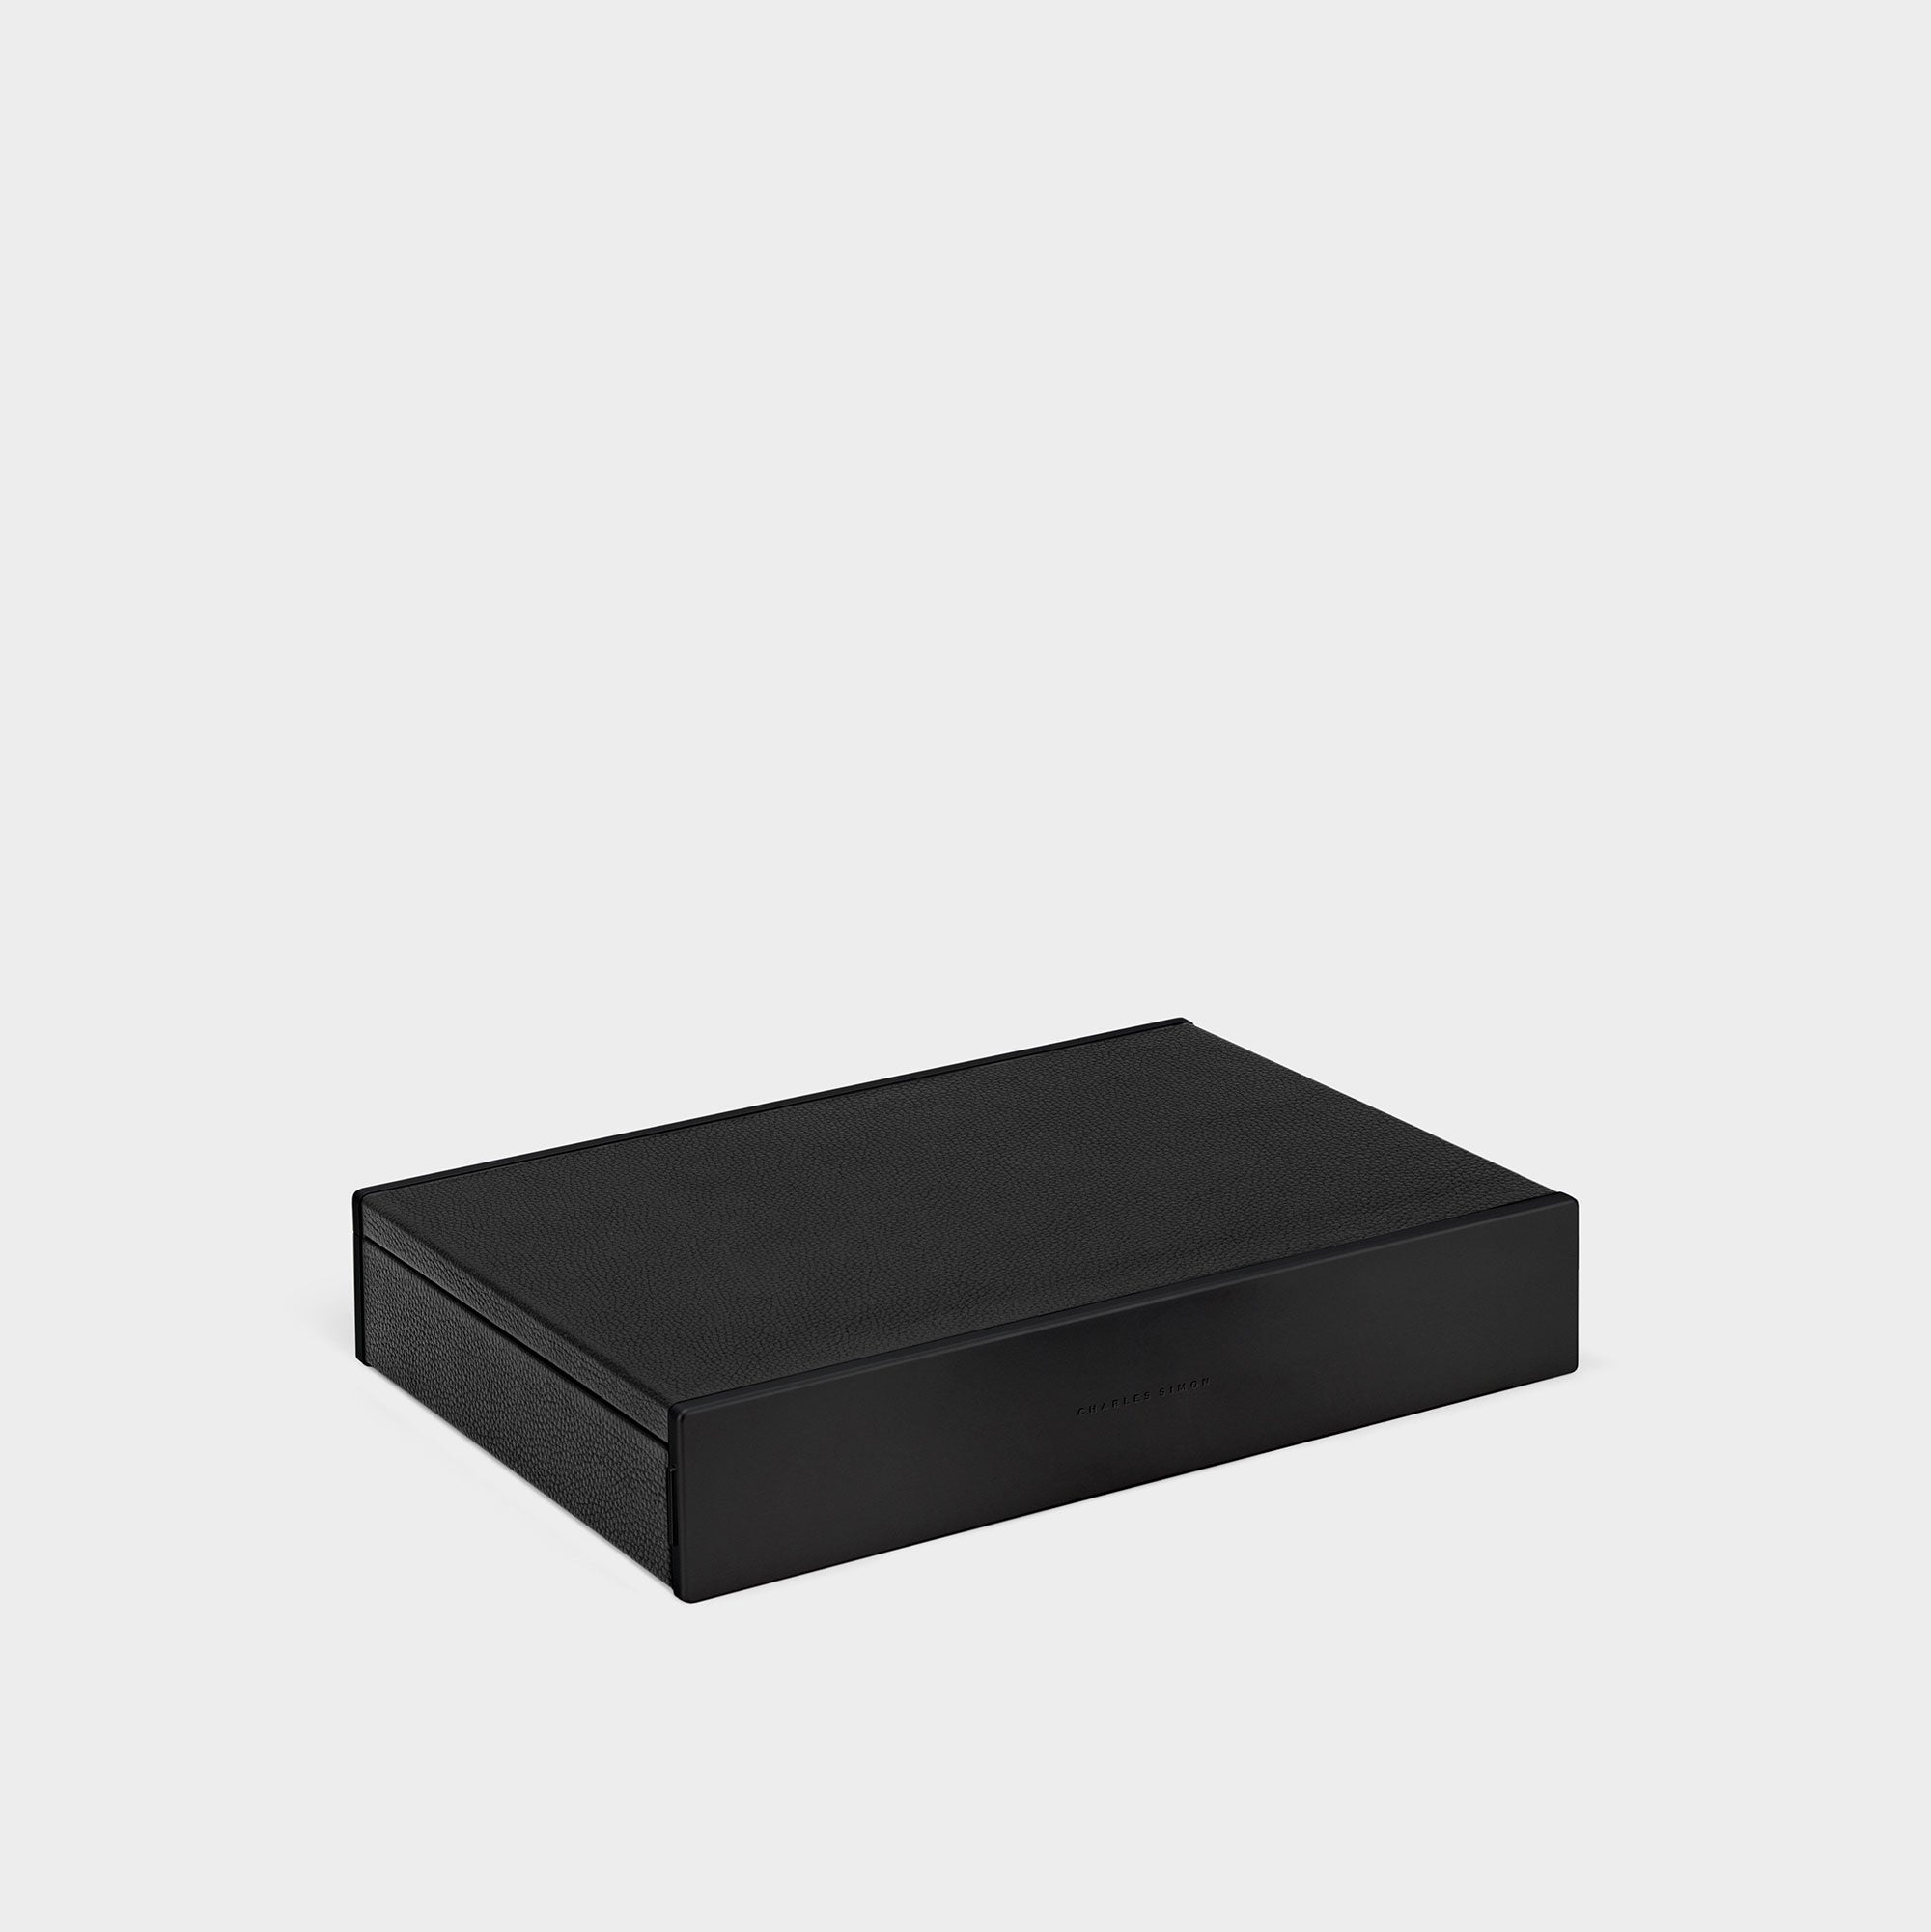 Closed all black designer watch box by Charles Simon. Handcrafted in Canada.